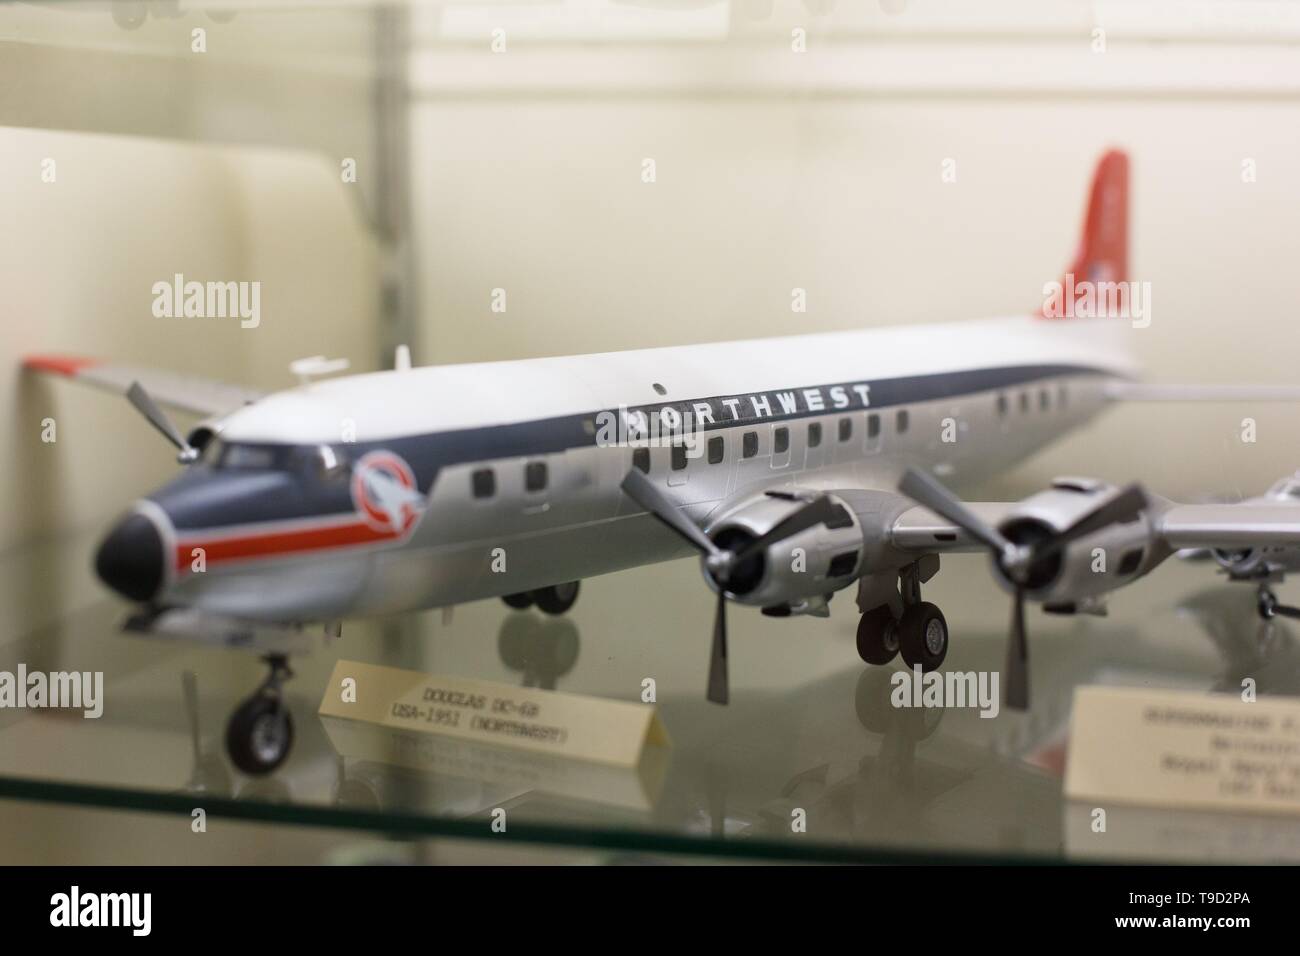 A model of a Northwest airlines jet from the 1950s on display at the Oregon Air and Space Museum in Eugene, Oregon, USA. Stock Photo